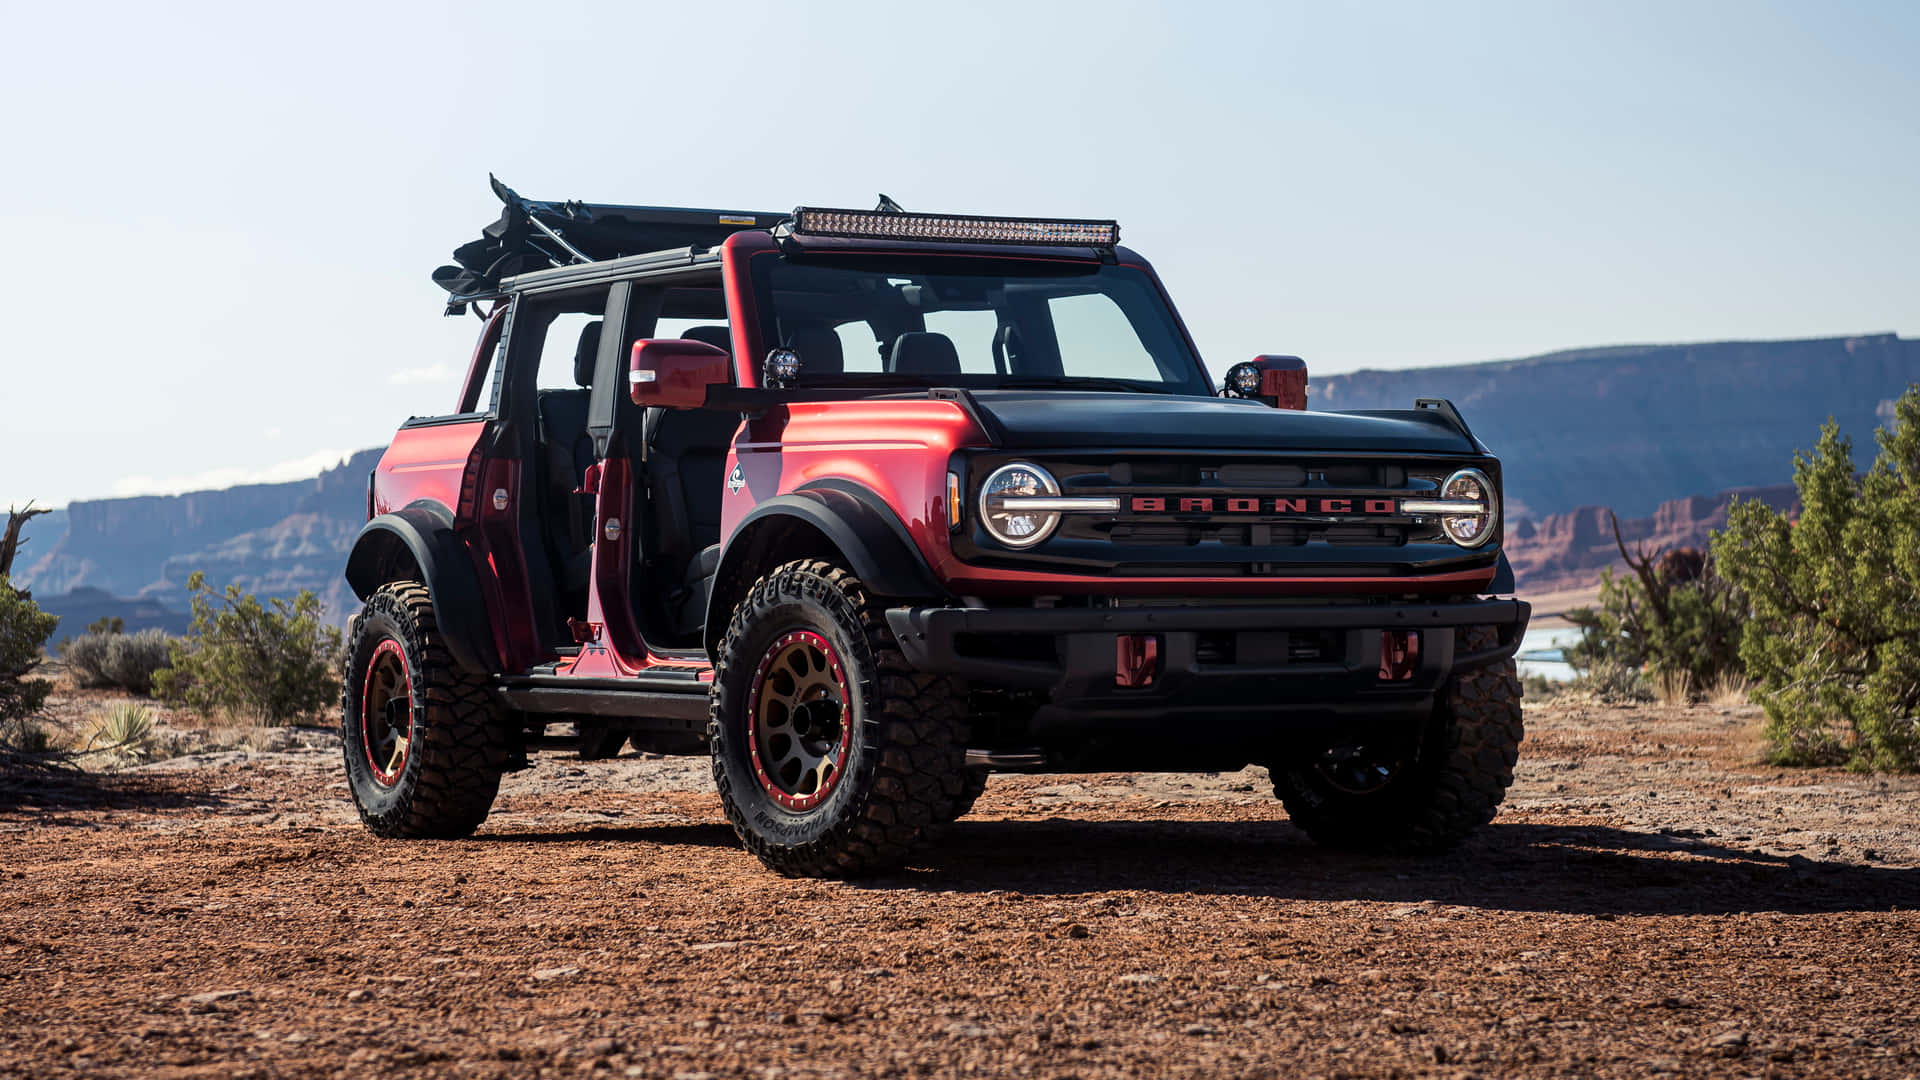 Enjoy the adventure in the 2020 Ford Bronco!